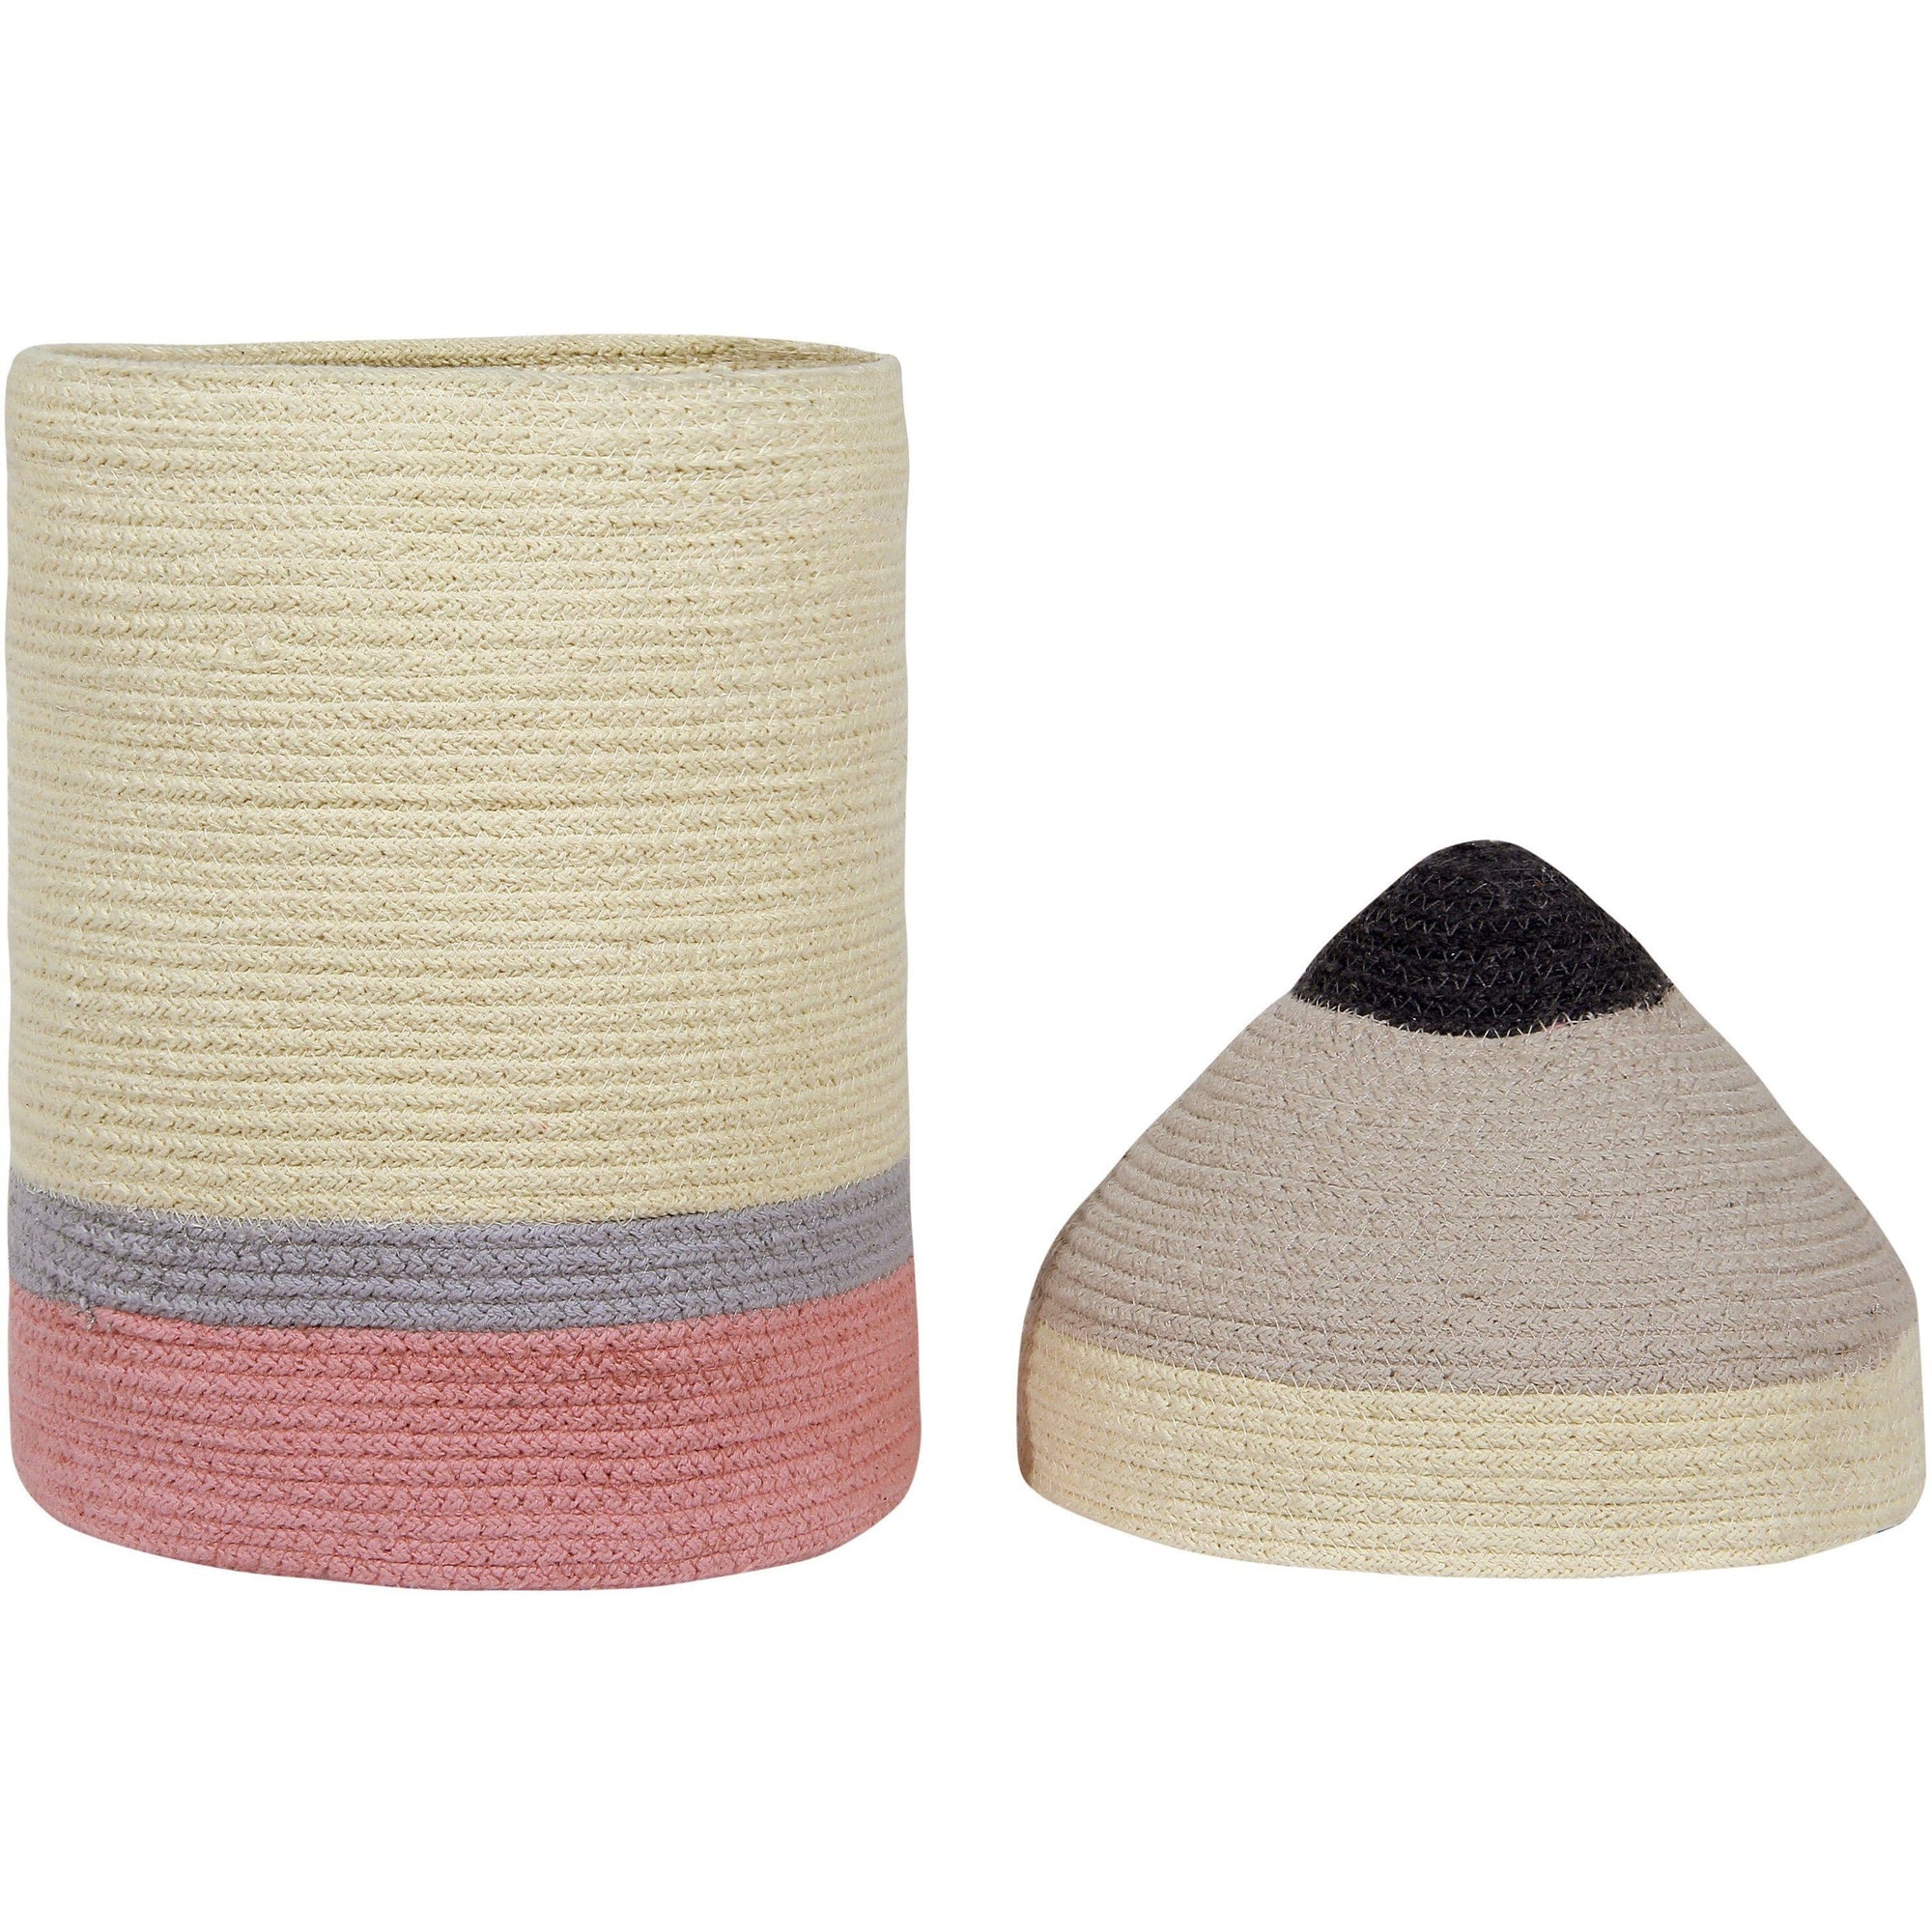 Rugs by Roo | Lorena Canals Pencil Large Basket-BSK-PENCIL-L